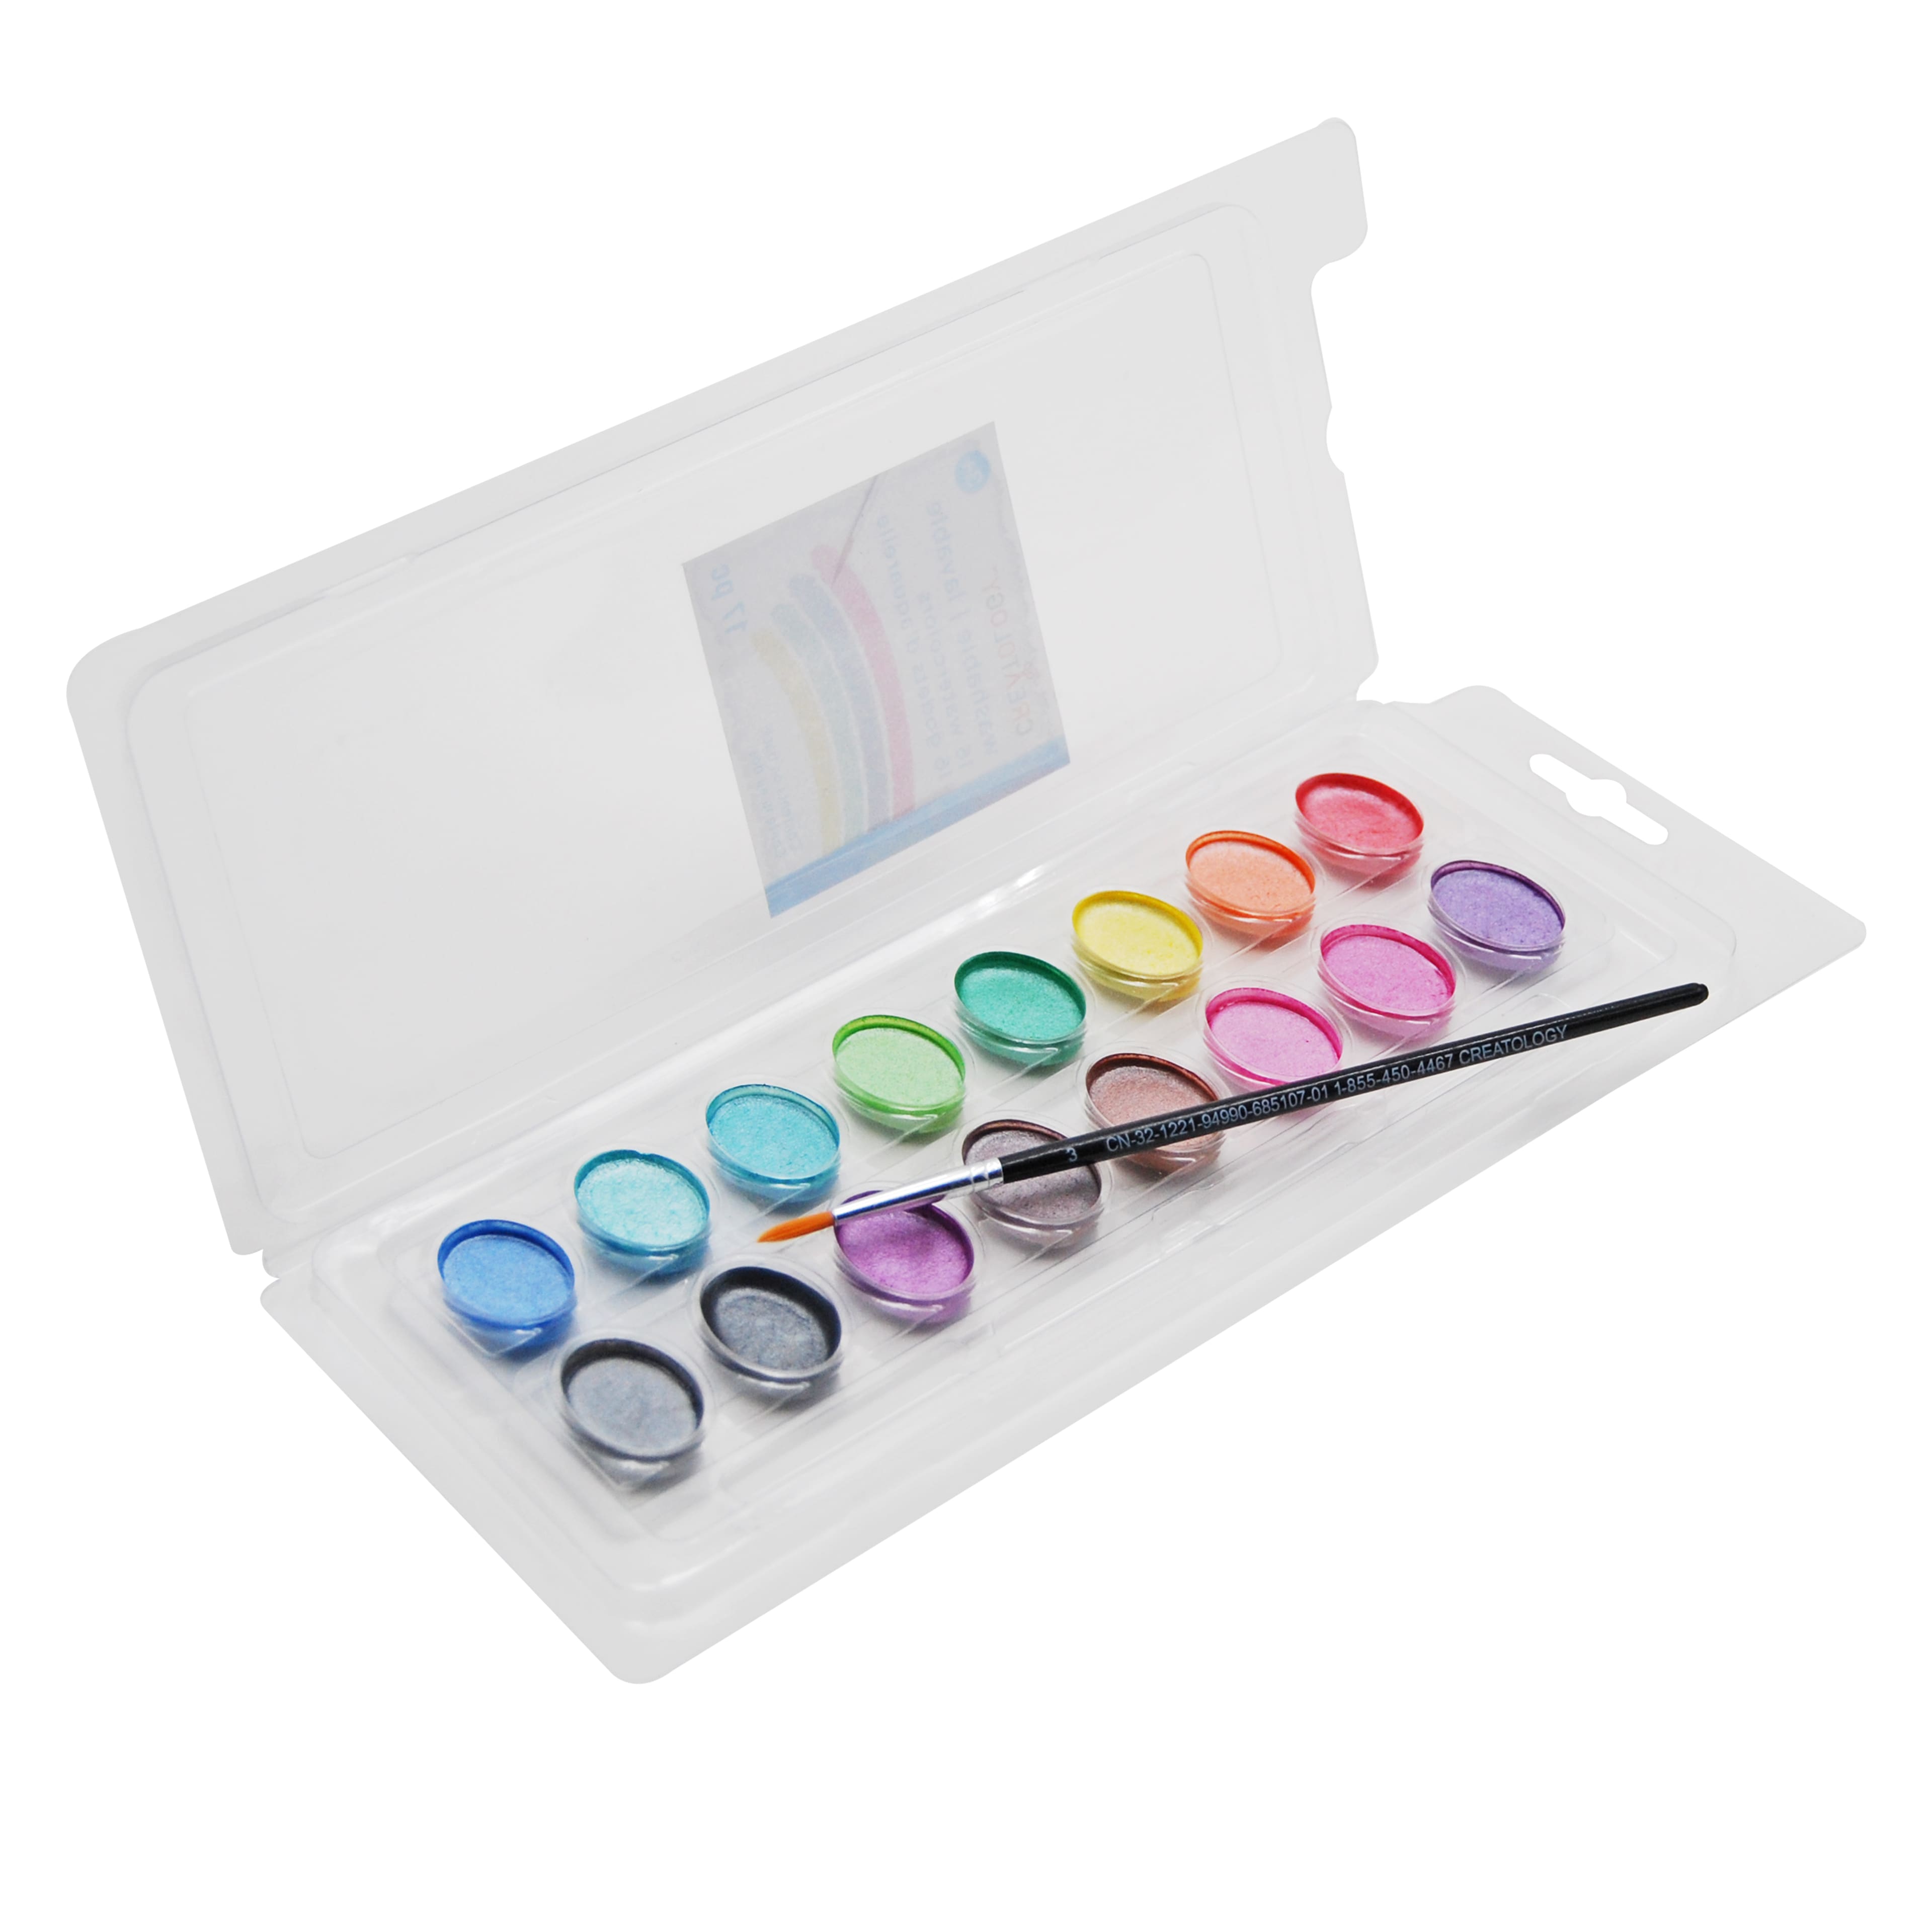 12 Colors Squeezable Tempera Brush Paint Set with Assorted Basic/ Neon/ Pastel Colors